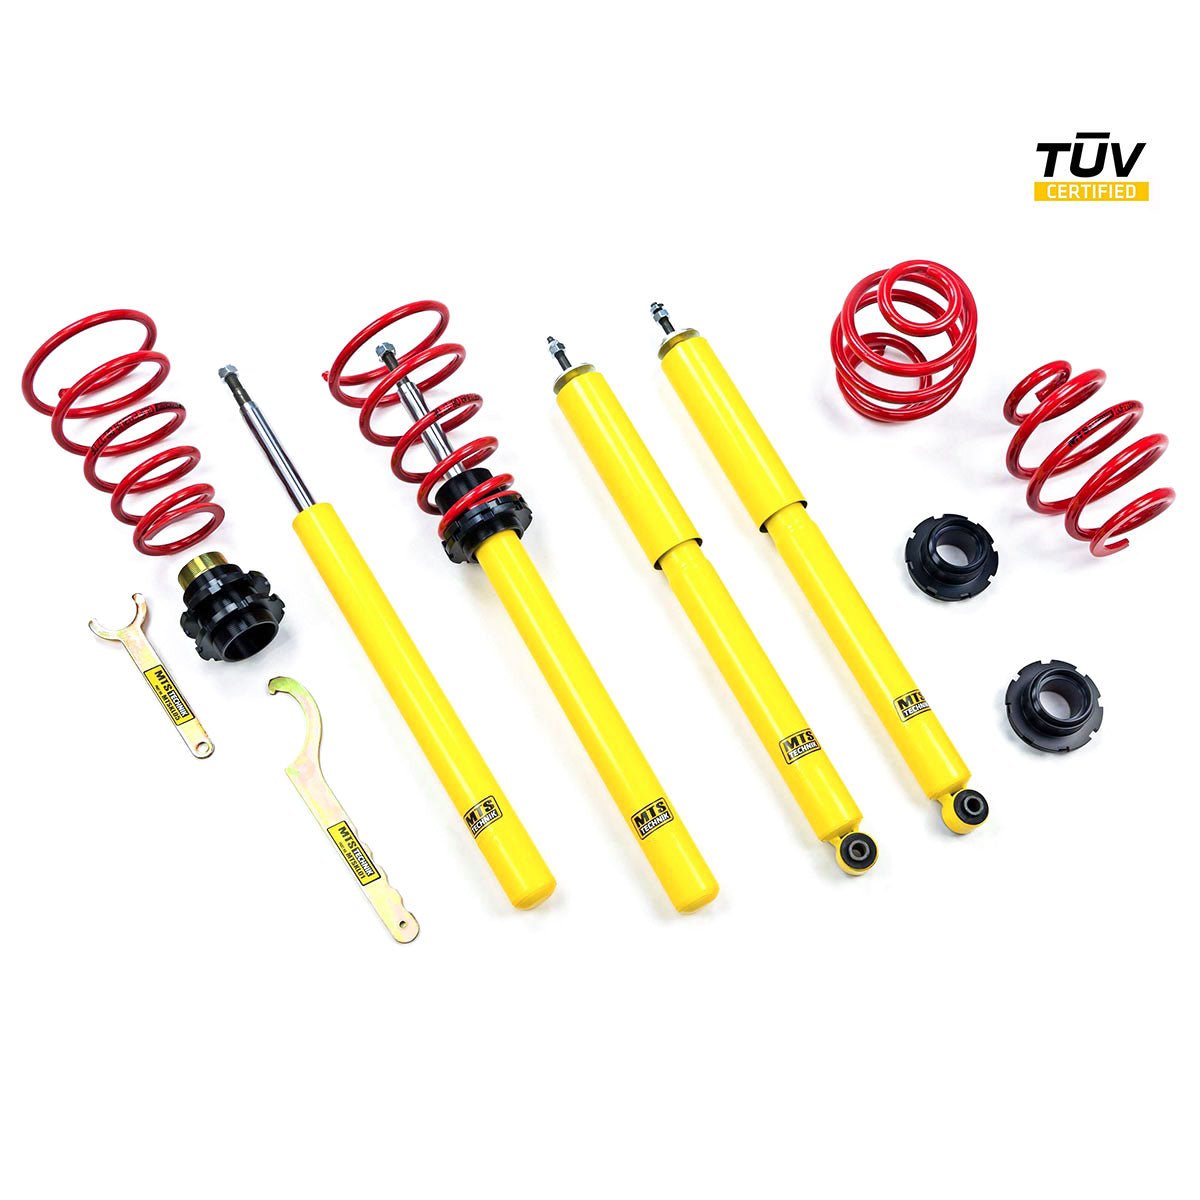 MTS TECHNIK coilover kit STREET BMW E30 Touring (with TÜV) - PARTS33 GmbH